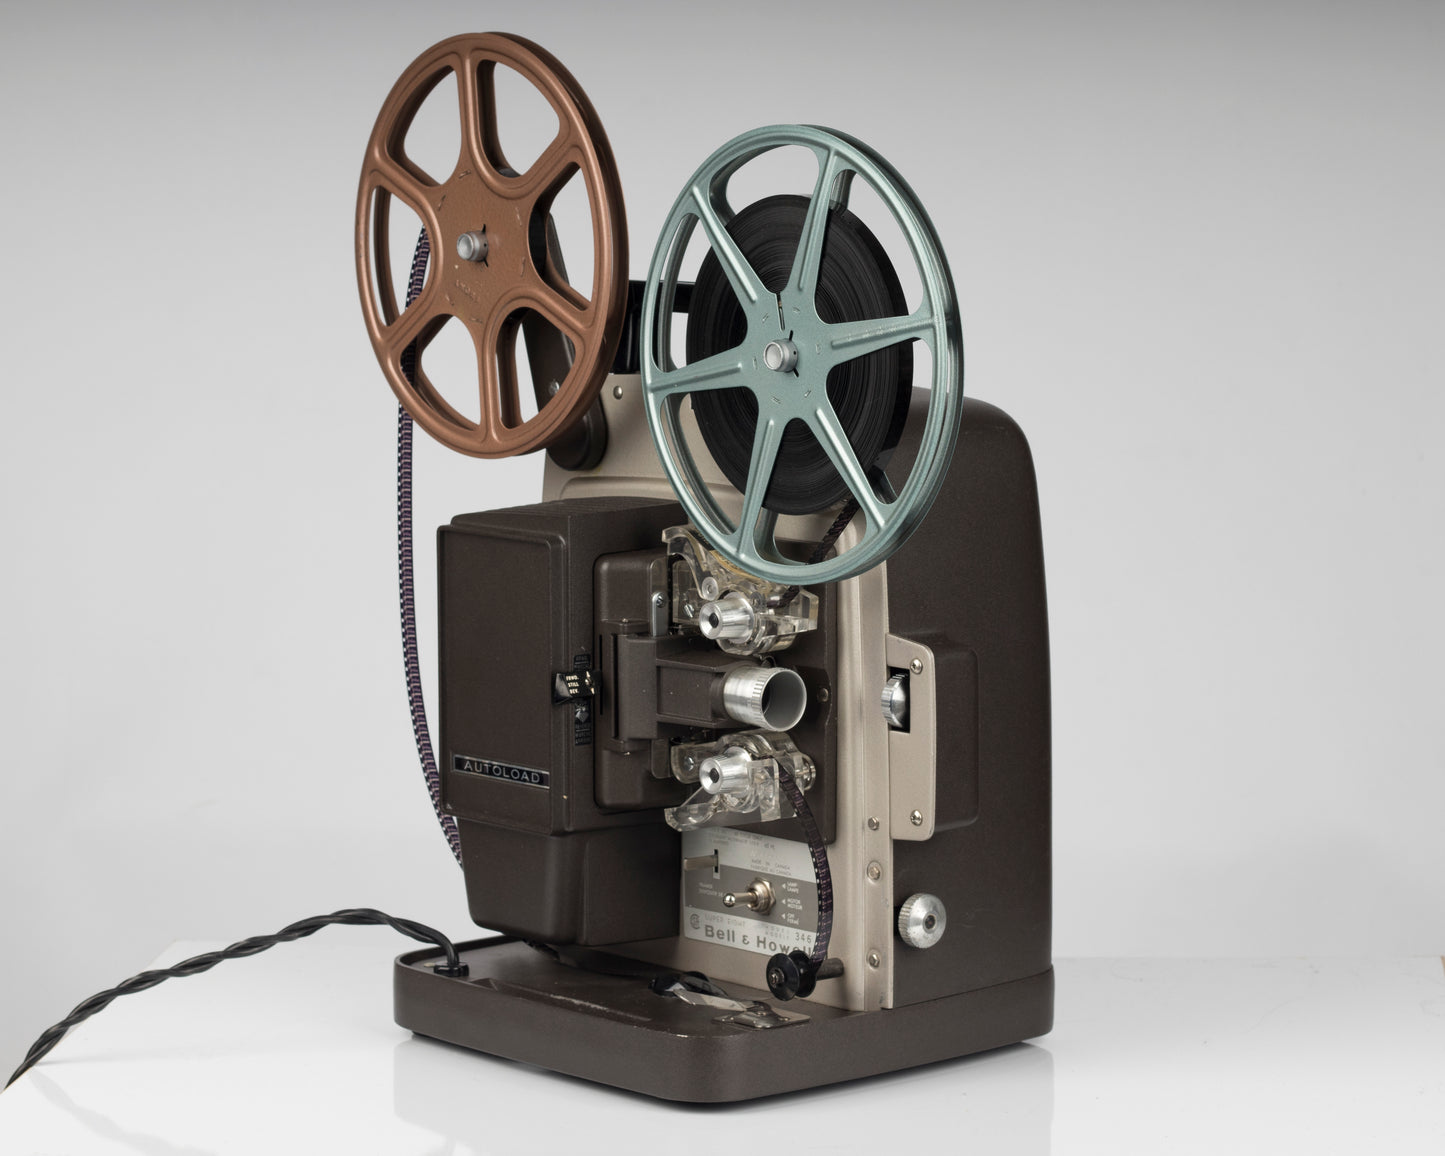 Bell and Howell 346 Super 8 movie projector